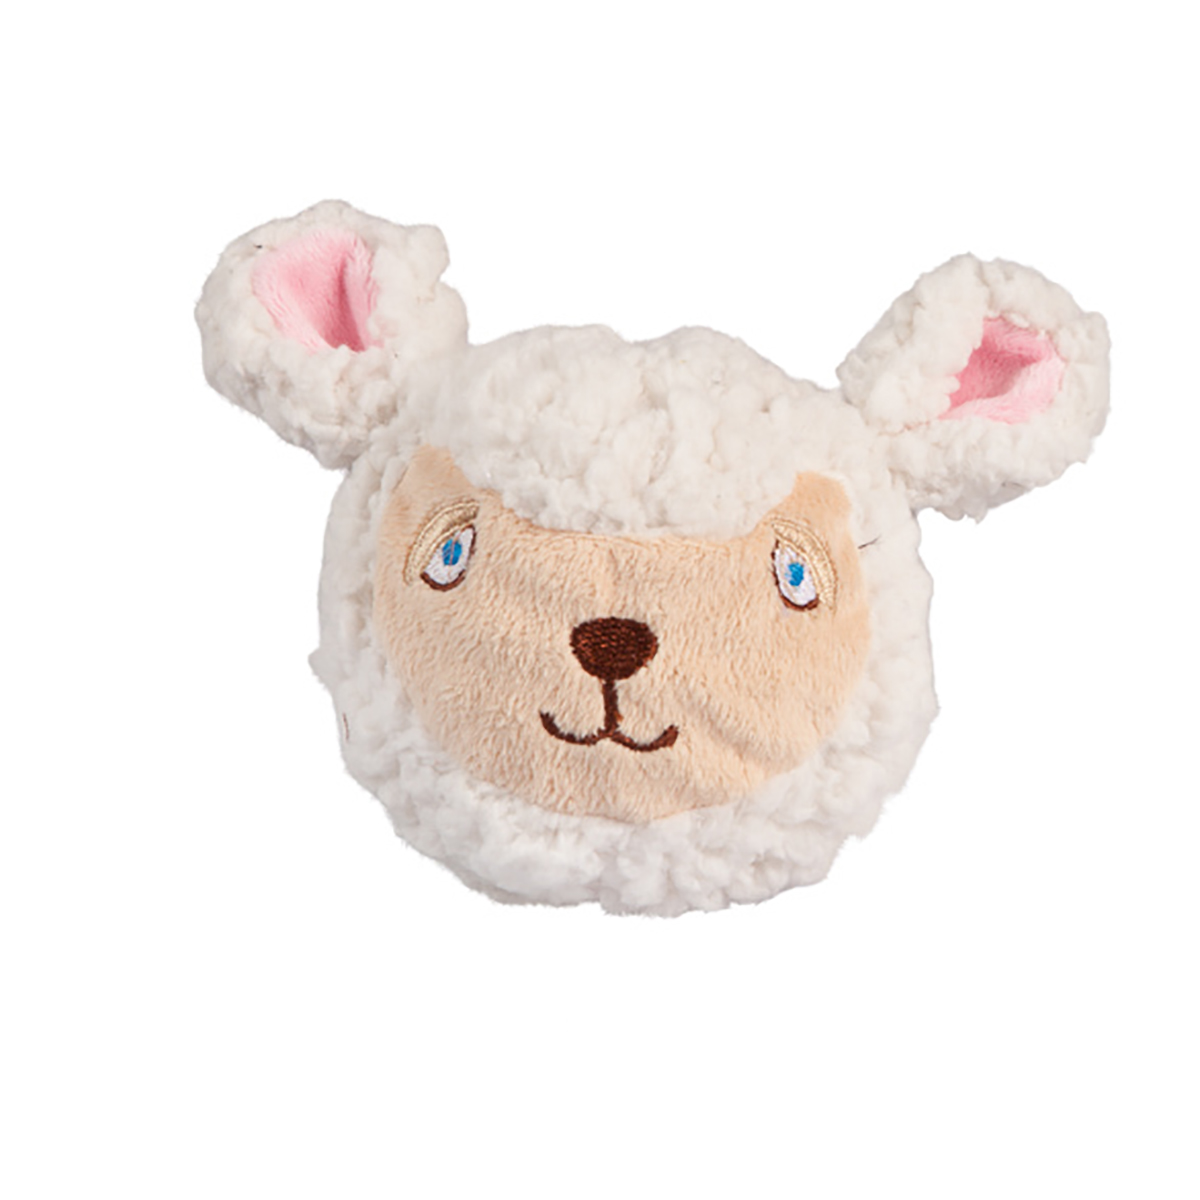 Country Critter Faballs Dog Toy - Sheep | BaxterBoo